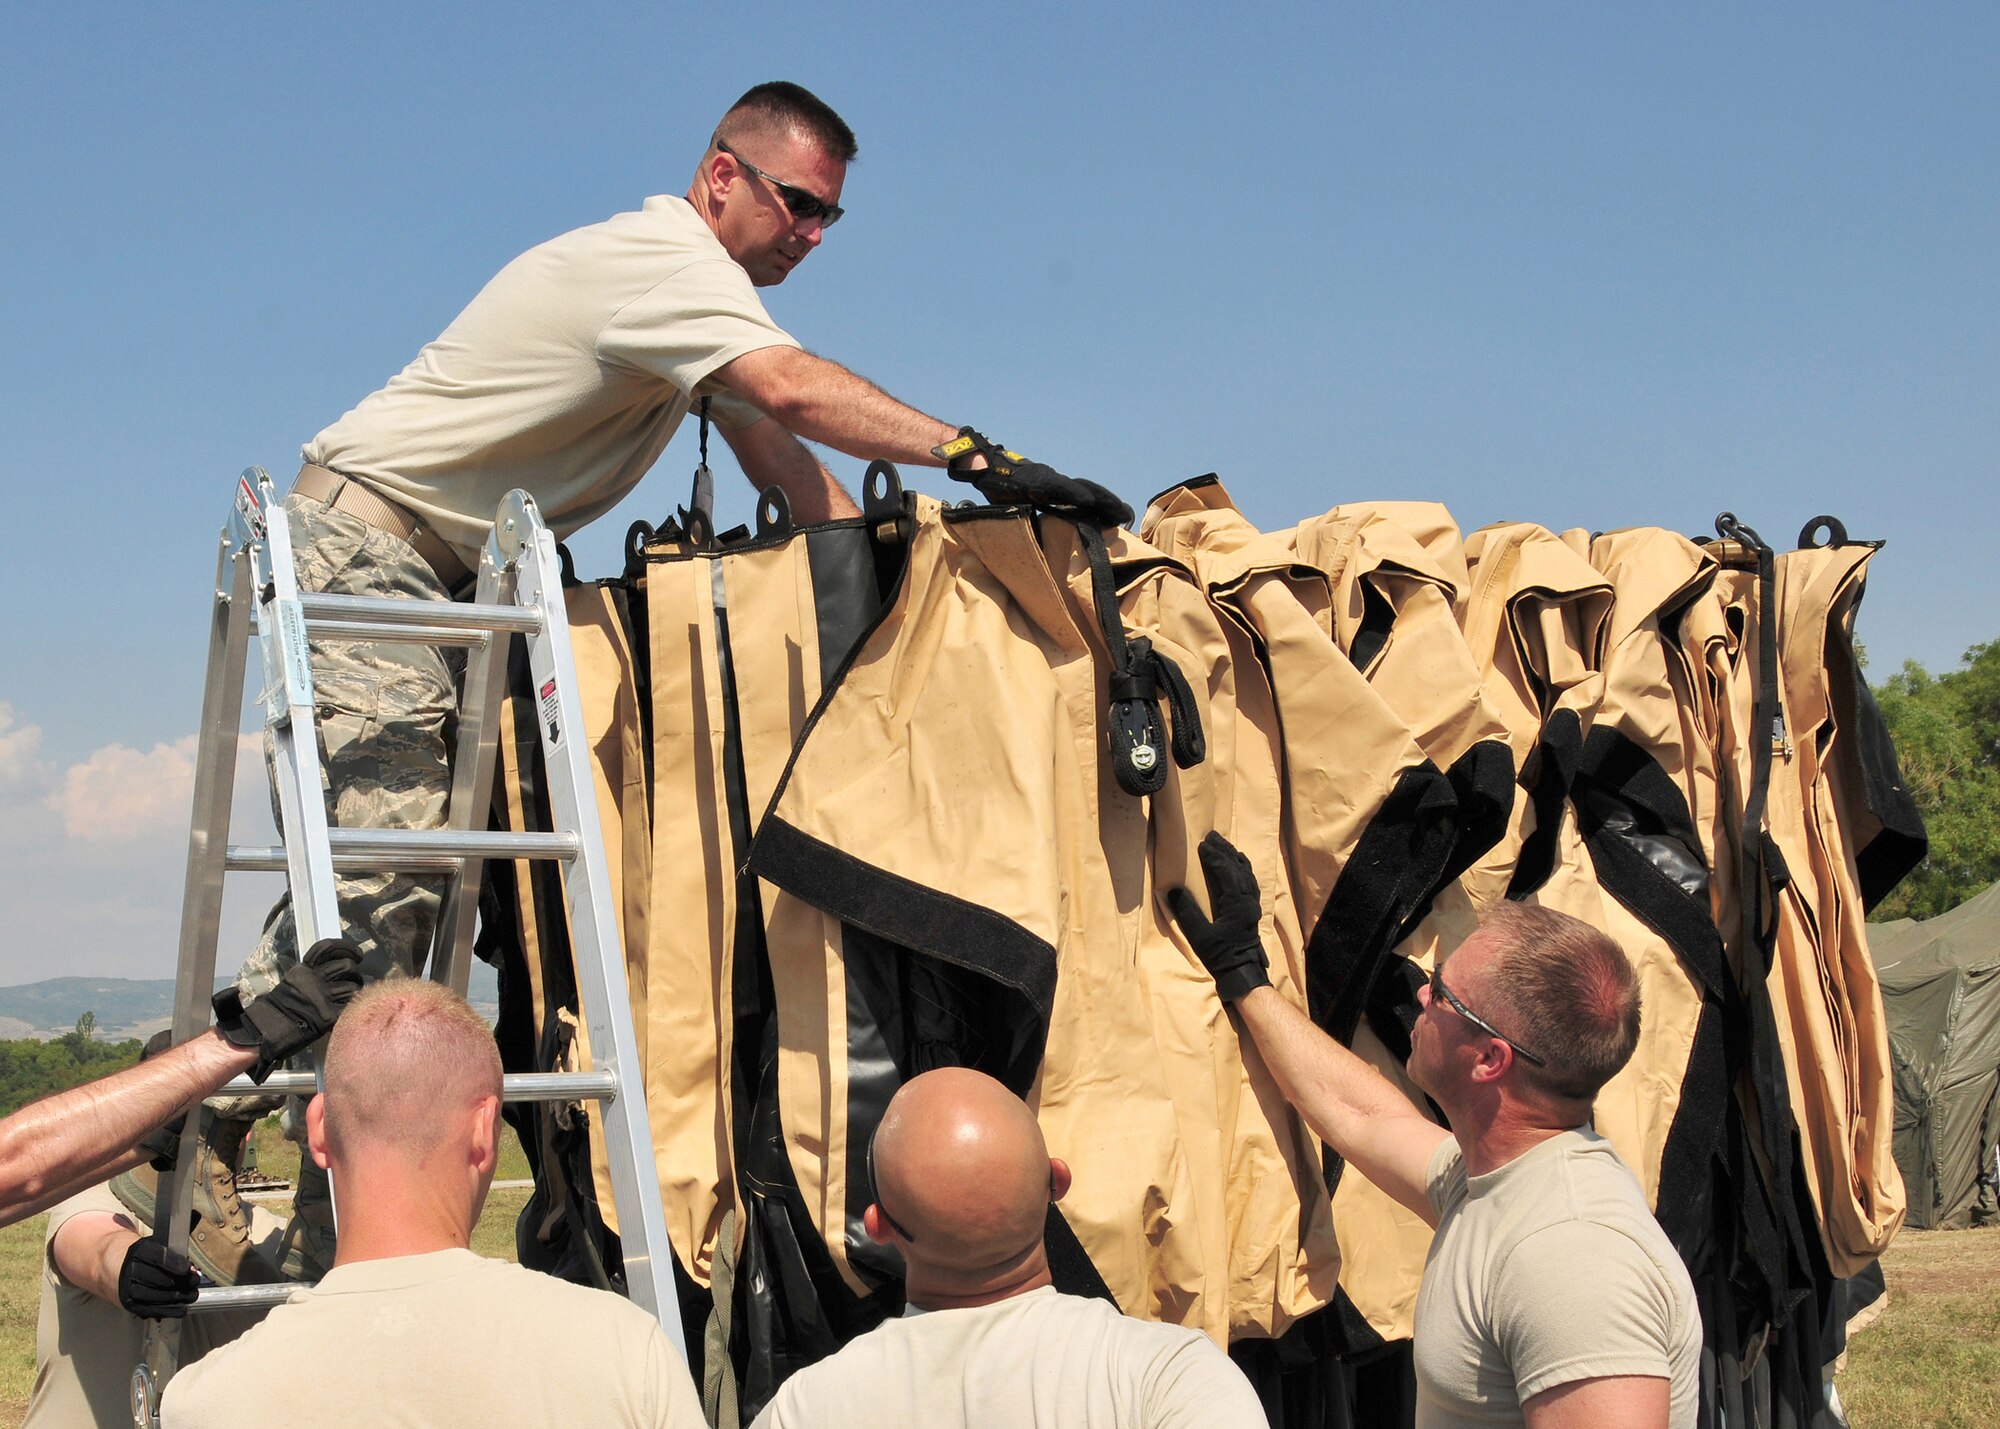 U.S. Air Force Master Sgt. Ryan Leith (top), 435th Expeditionary Air Ground Operations Group medical technician, along with fellow contingency response group members, set up a tent in the Knez Mihailo Barracks in Nis, Serbia, Aug. 29, 2009. Sergeant Leith, along with 31 fellow 435th Air Ground Operations Wing members, deployed to Serbia for two weeks in support of the Medical Training Exercise in Central and Eastern Europe 2009, better known as MEDCEUR 2009.
(U.S. Air Force photo by Staff Sgt. Markus M. Maier)